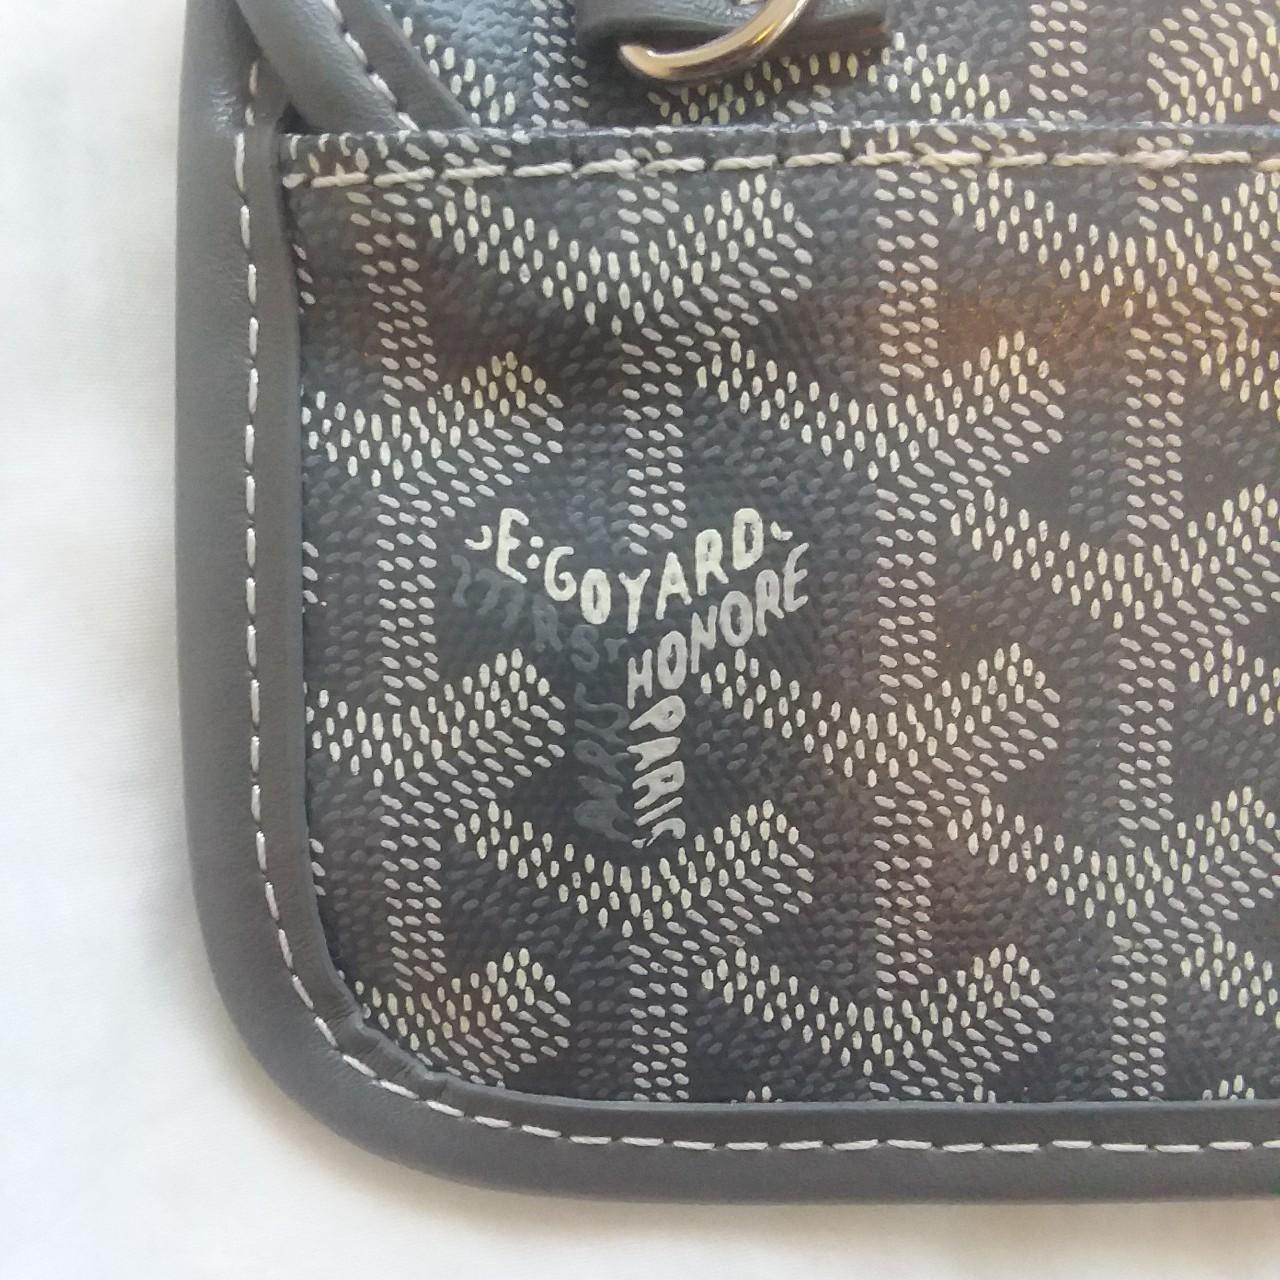 Goyard GM St. Louis Tote. Purchased second-hand. - Depop